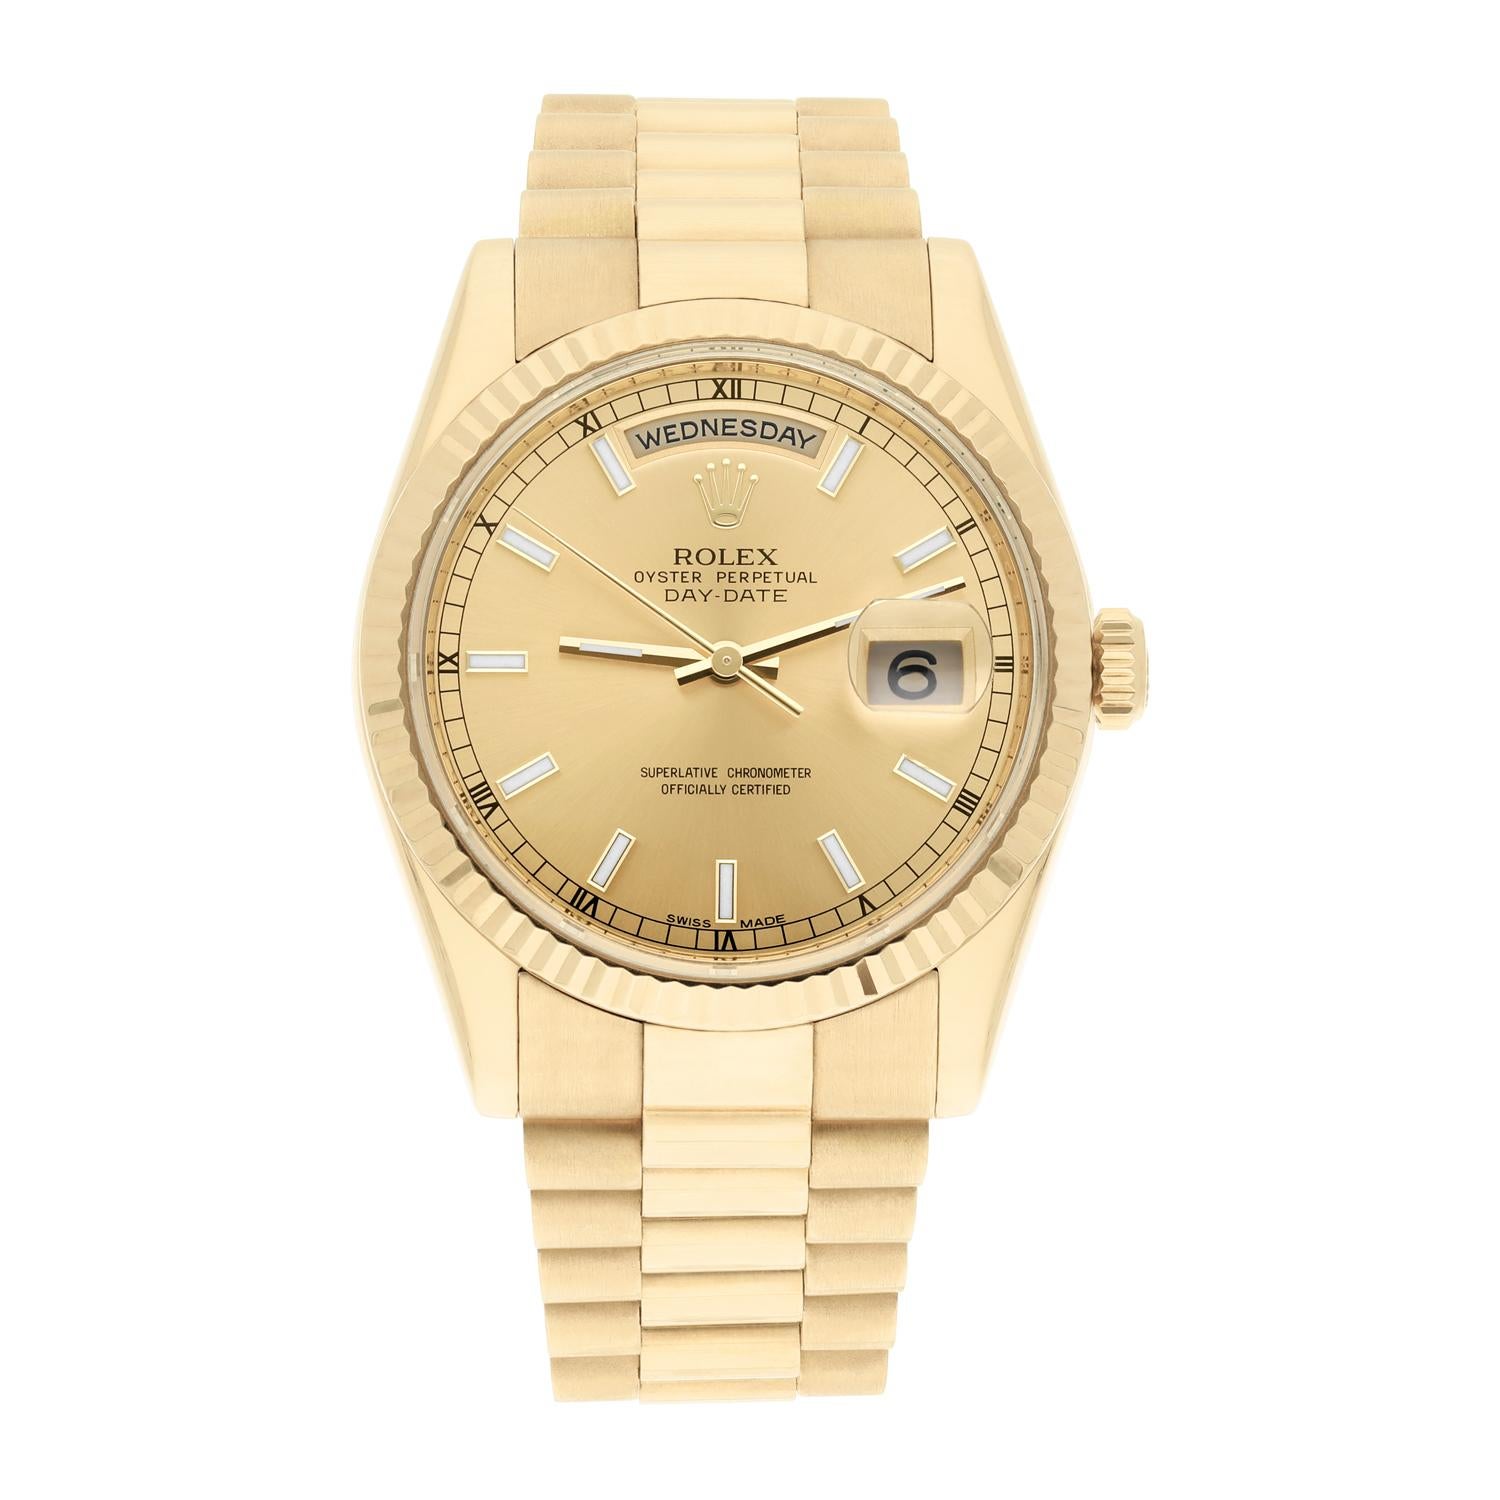 This watch has been professionally polished, serviced and does not have any visible scratches or blemishes. It is a genuine Rolex which has been inspected to verify authenticity. The bracelet is in mint condition.

Sale comes with a Rolex box and